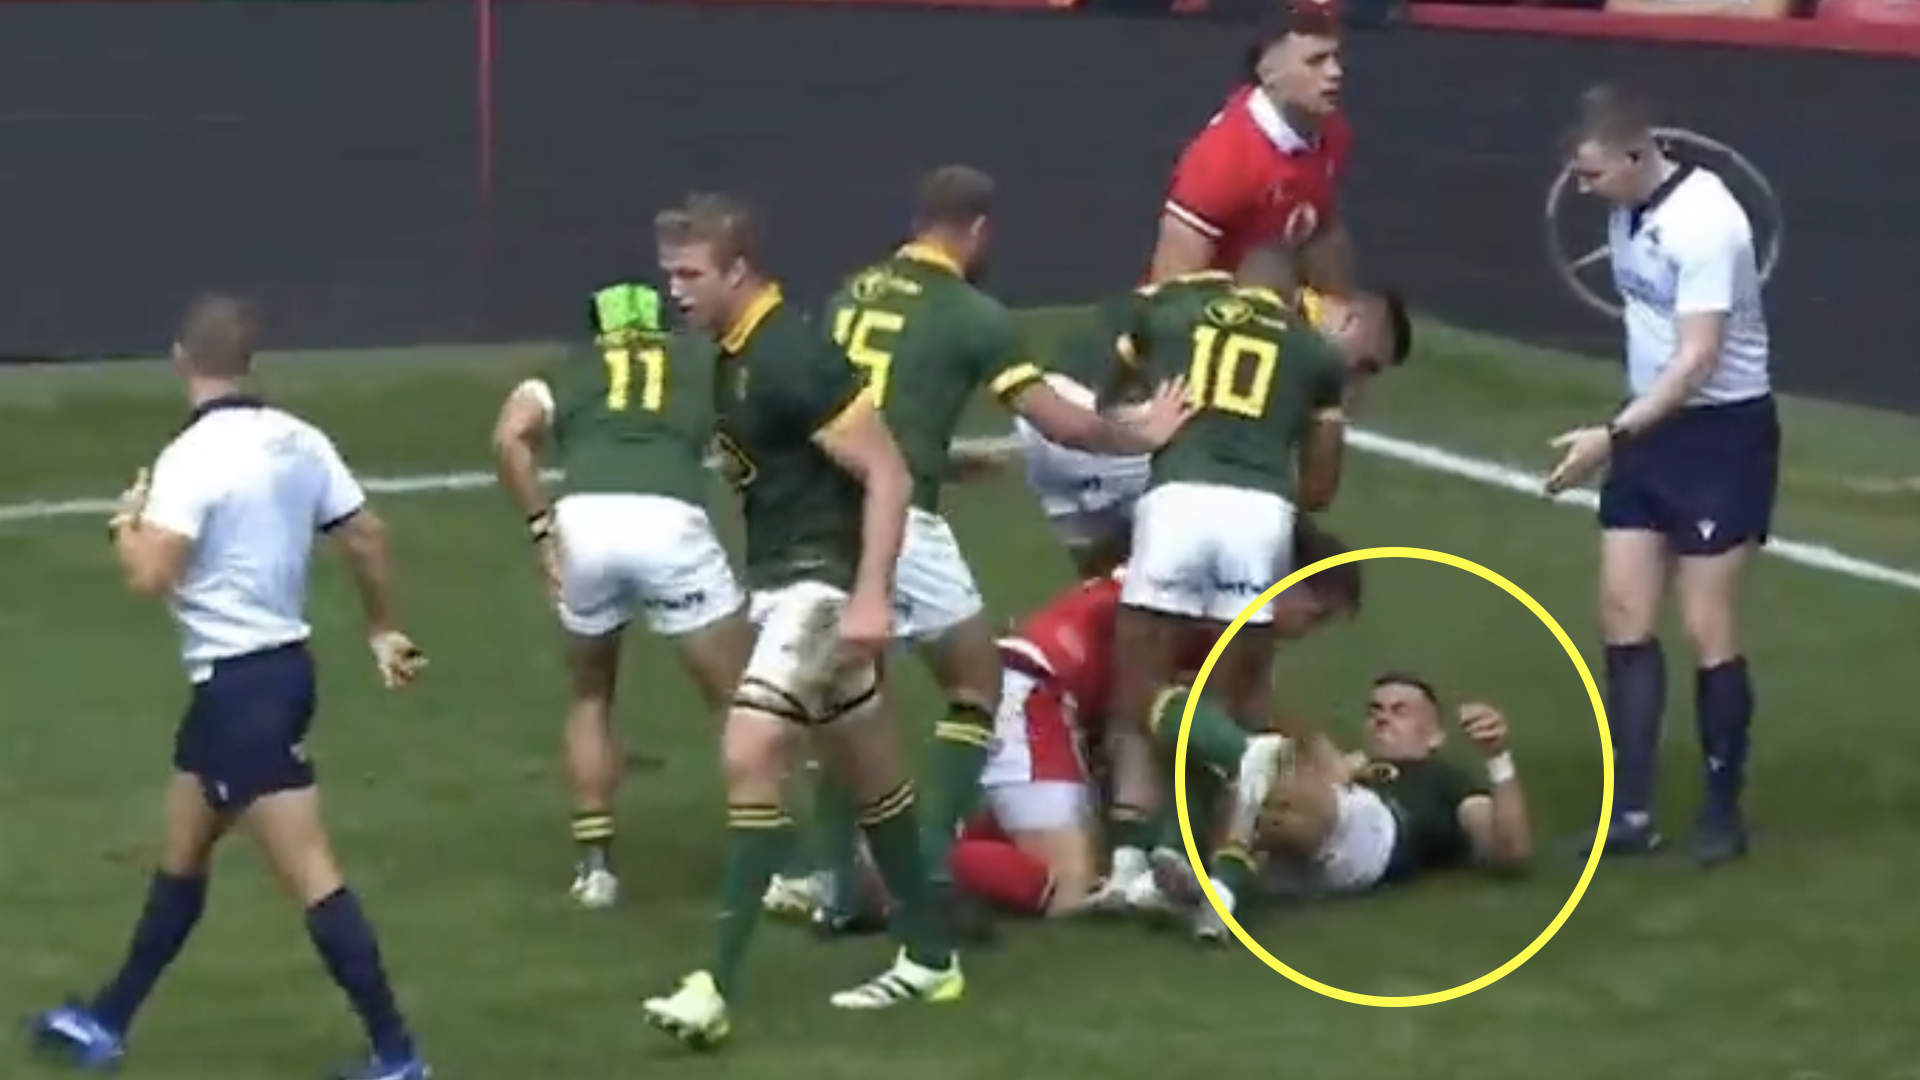 Jesse Kriel gifted easiest finish in history to end five-year try drought